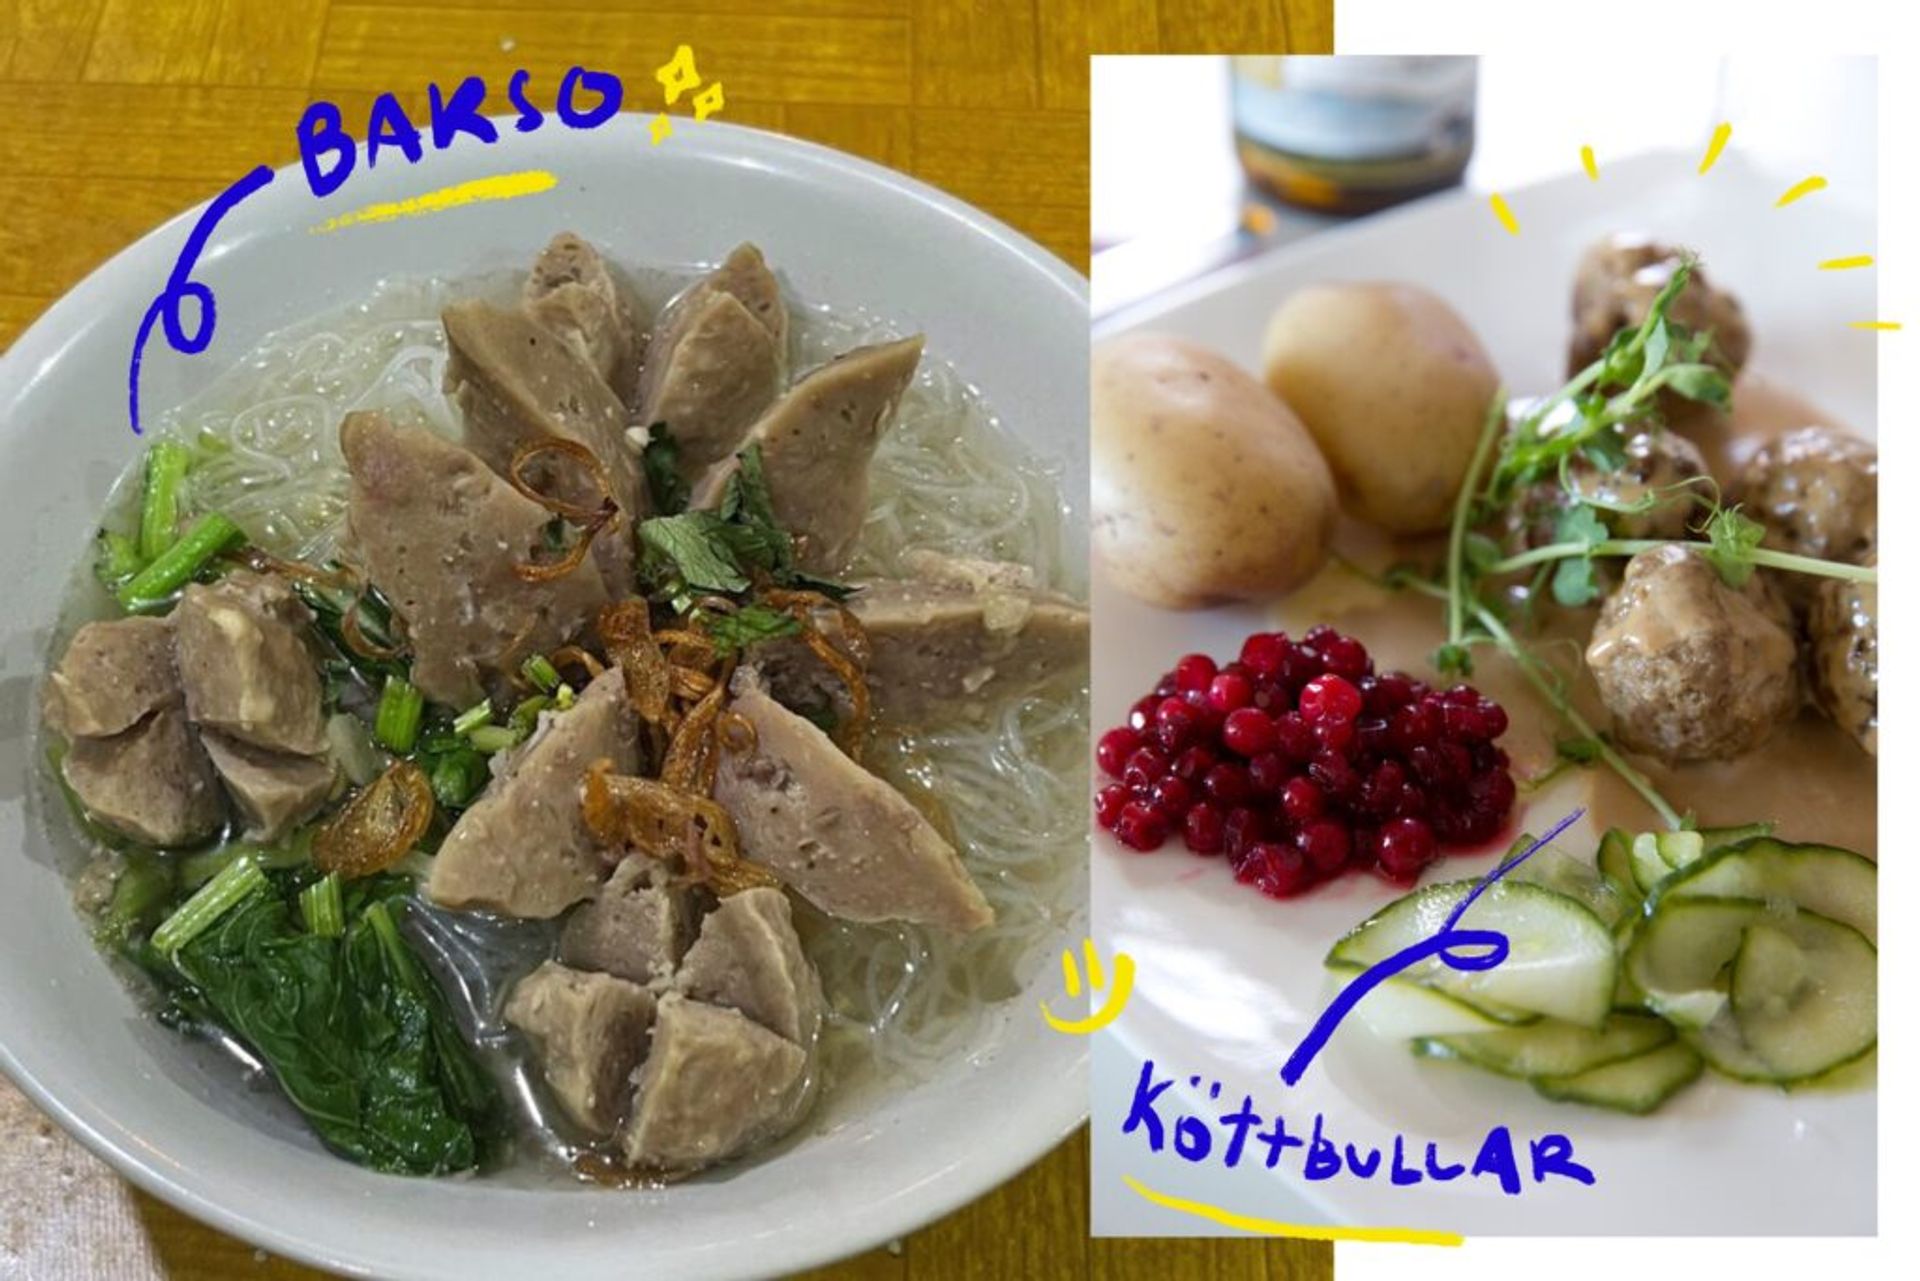 A side-by-side image compares the traditional dishes of Indonesia and Sweden, with Bakso, on the left, and Swedish meatballs, on the right.